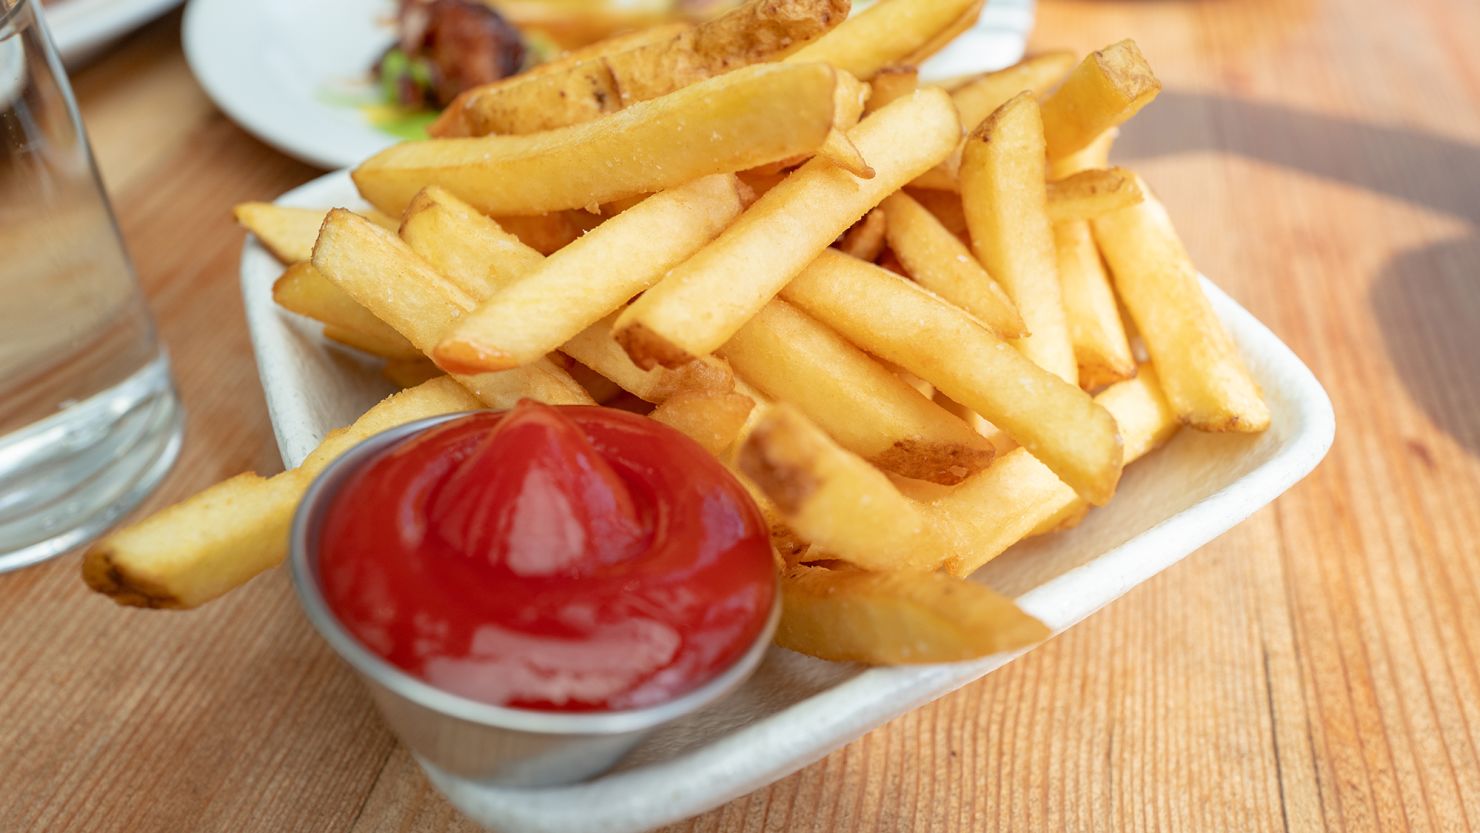 Plate of french fries and ketchup at Parada restaurant in Walnut Creek, California, March 4, 2021. 